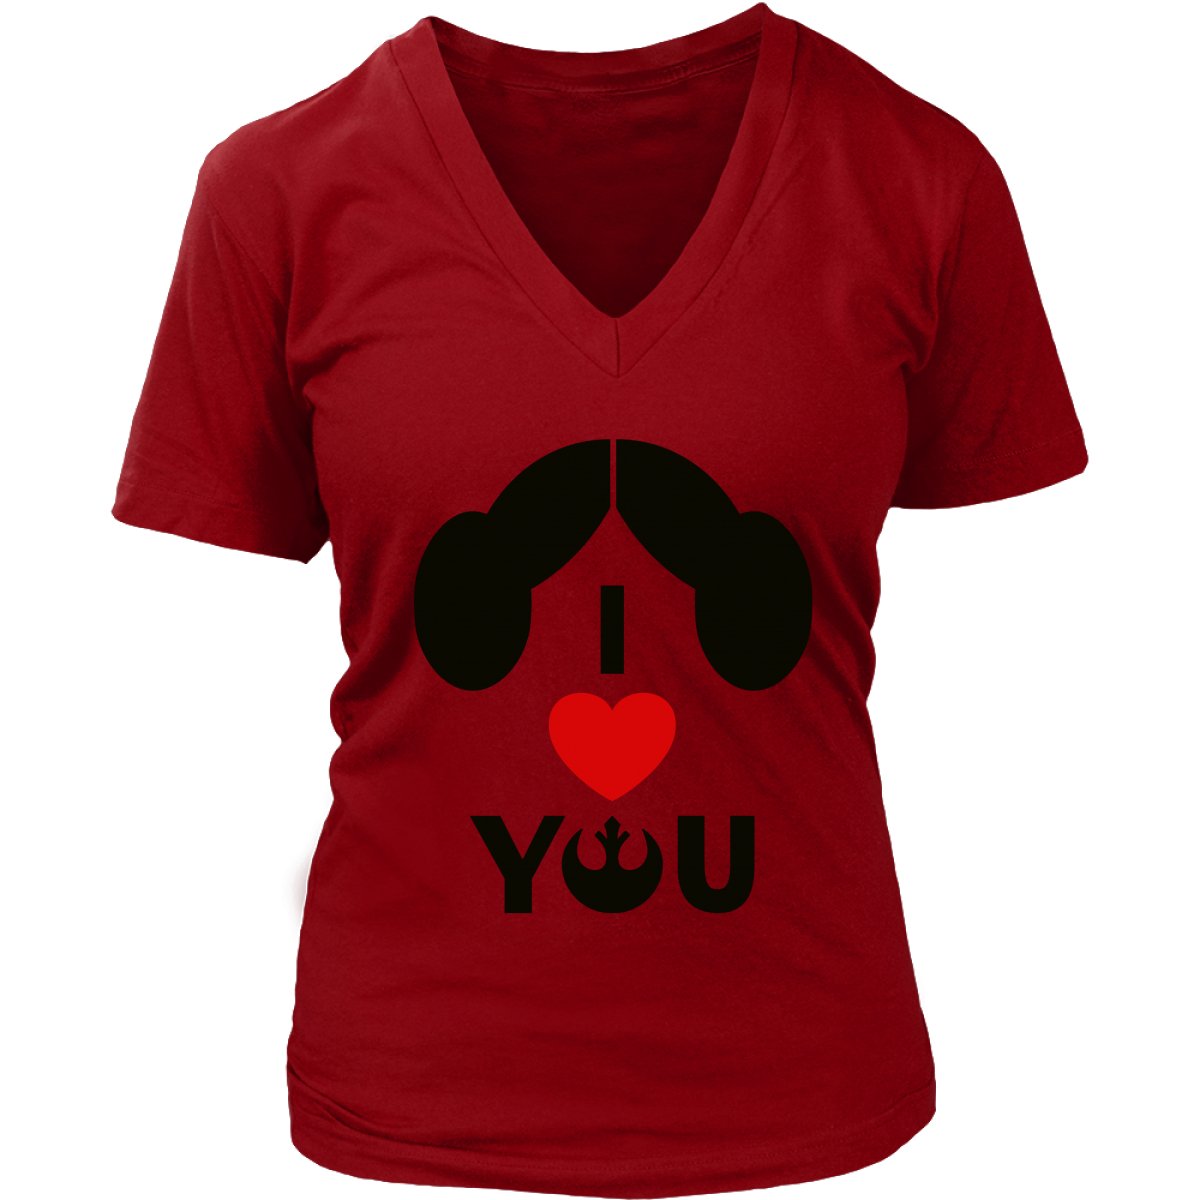 I love You, I Know Couple's Shirt - Beguiling Phenix Boutique